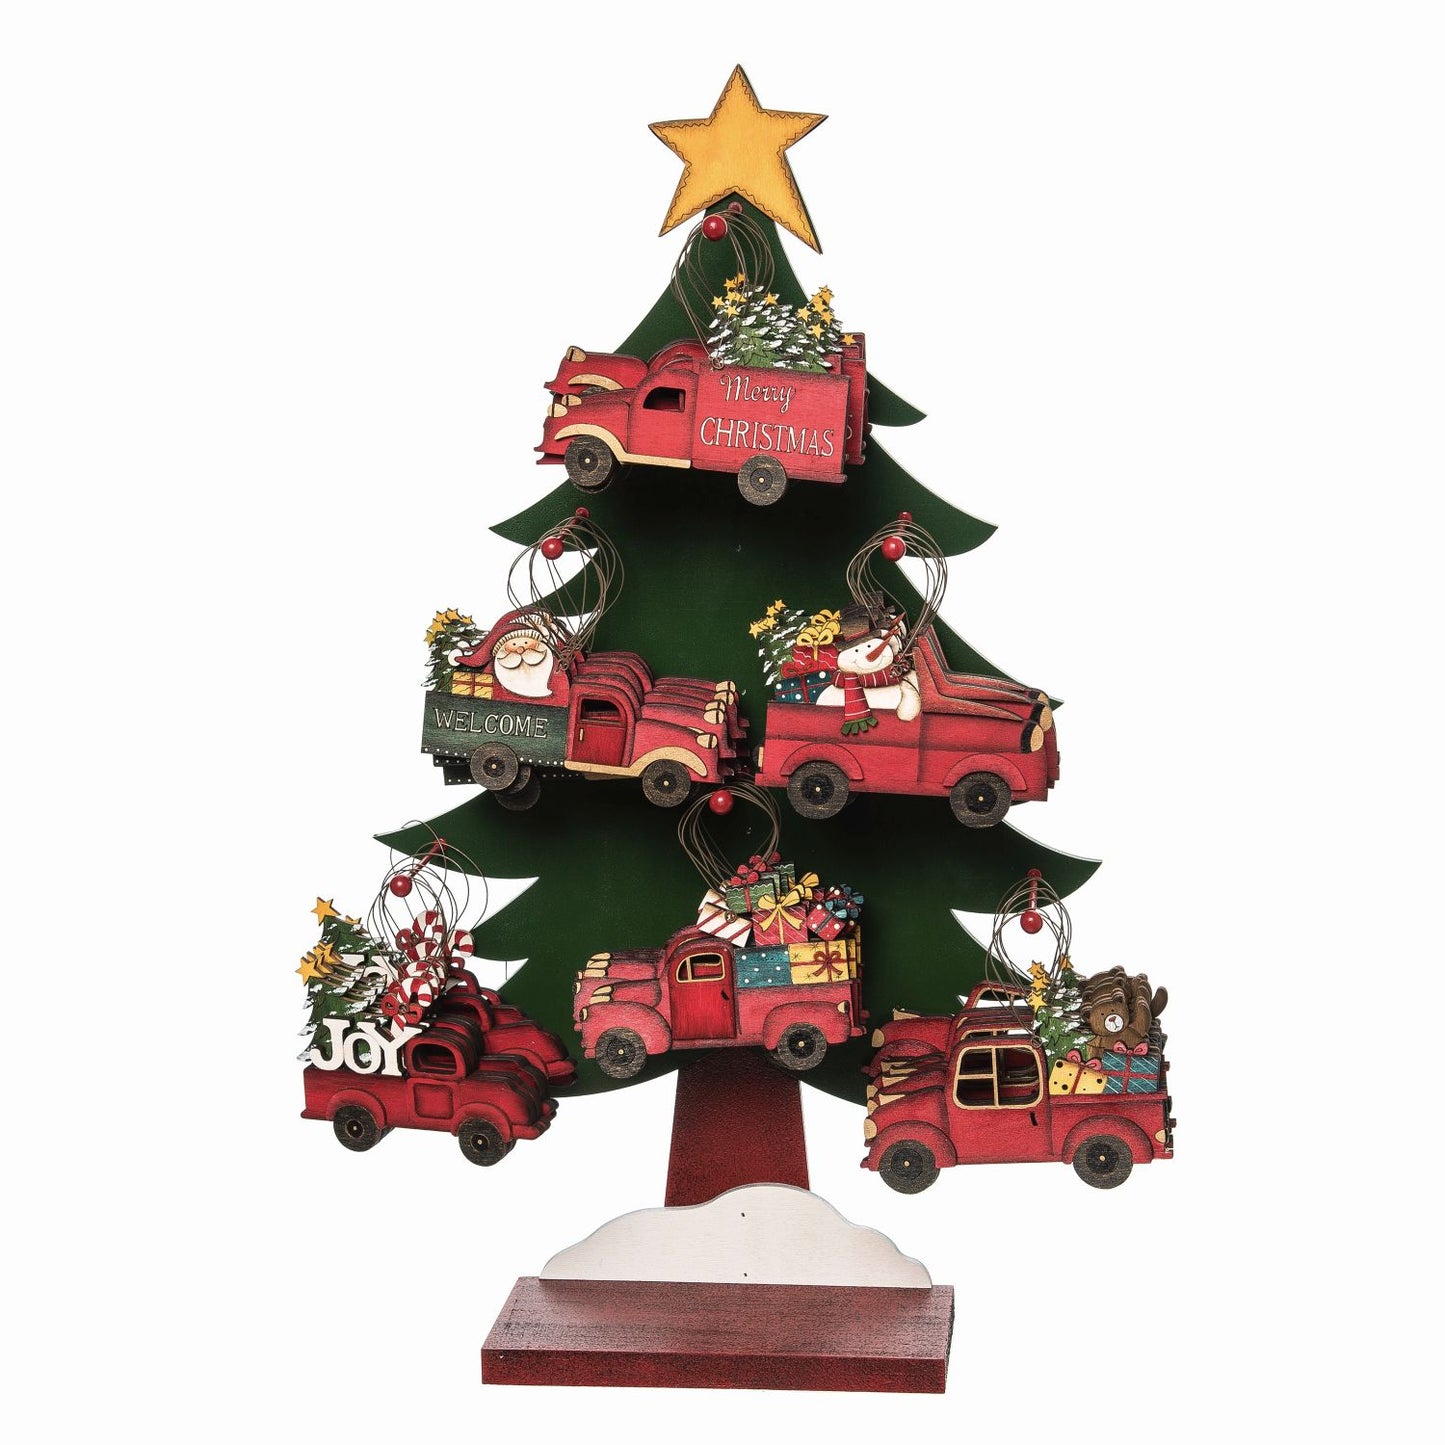 Transpac Plywood Truck Ornaments With Tree Display, Set Of 48